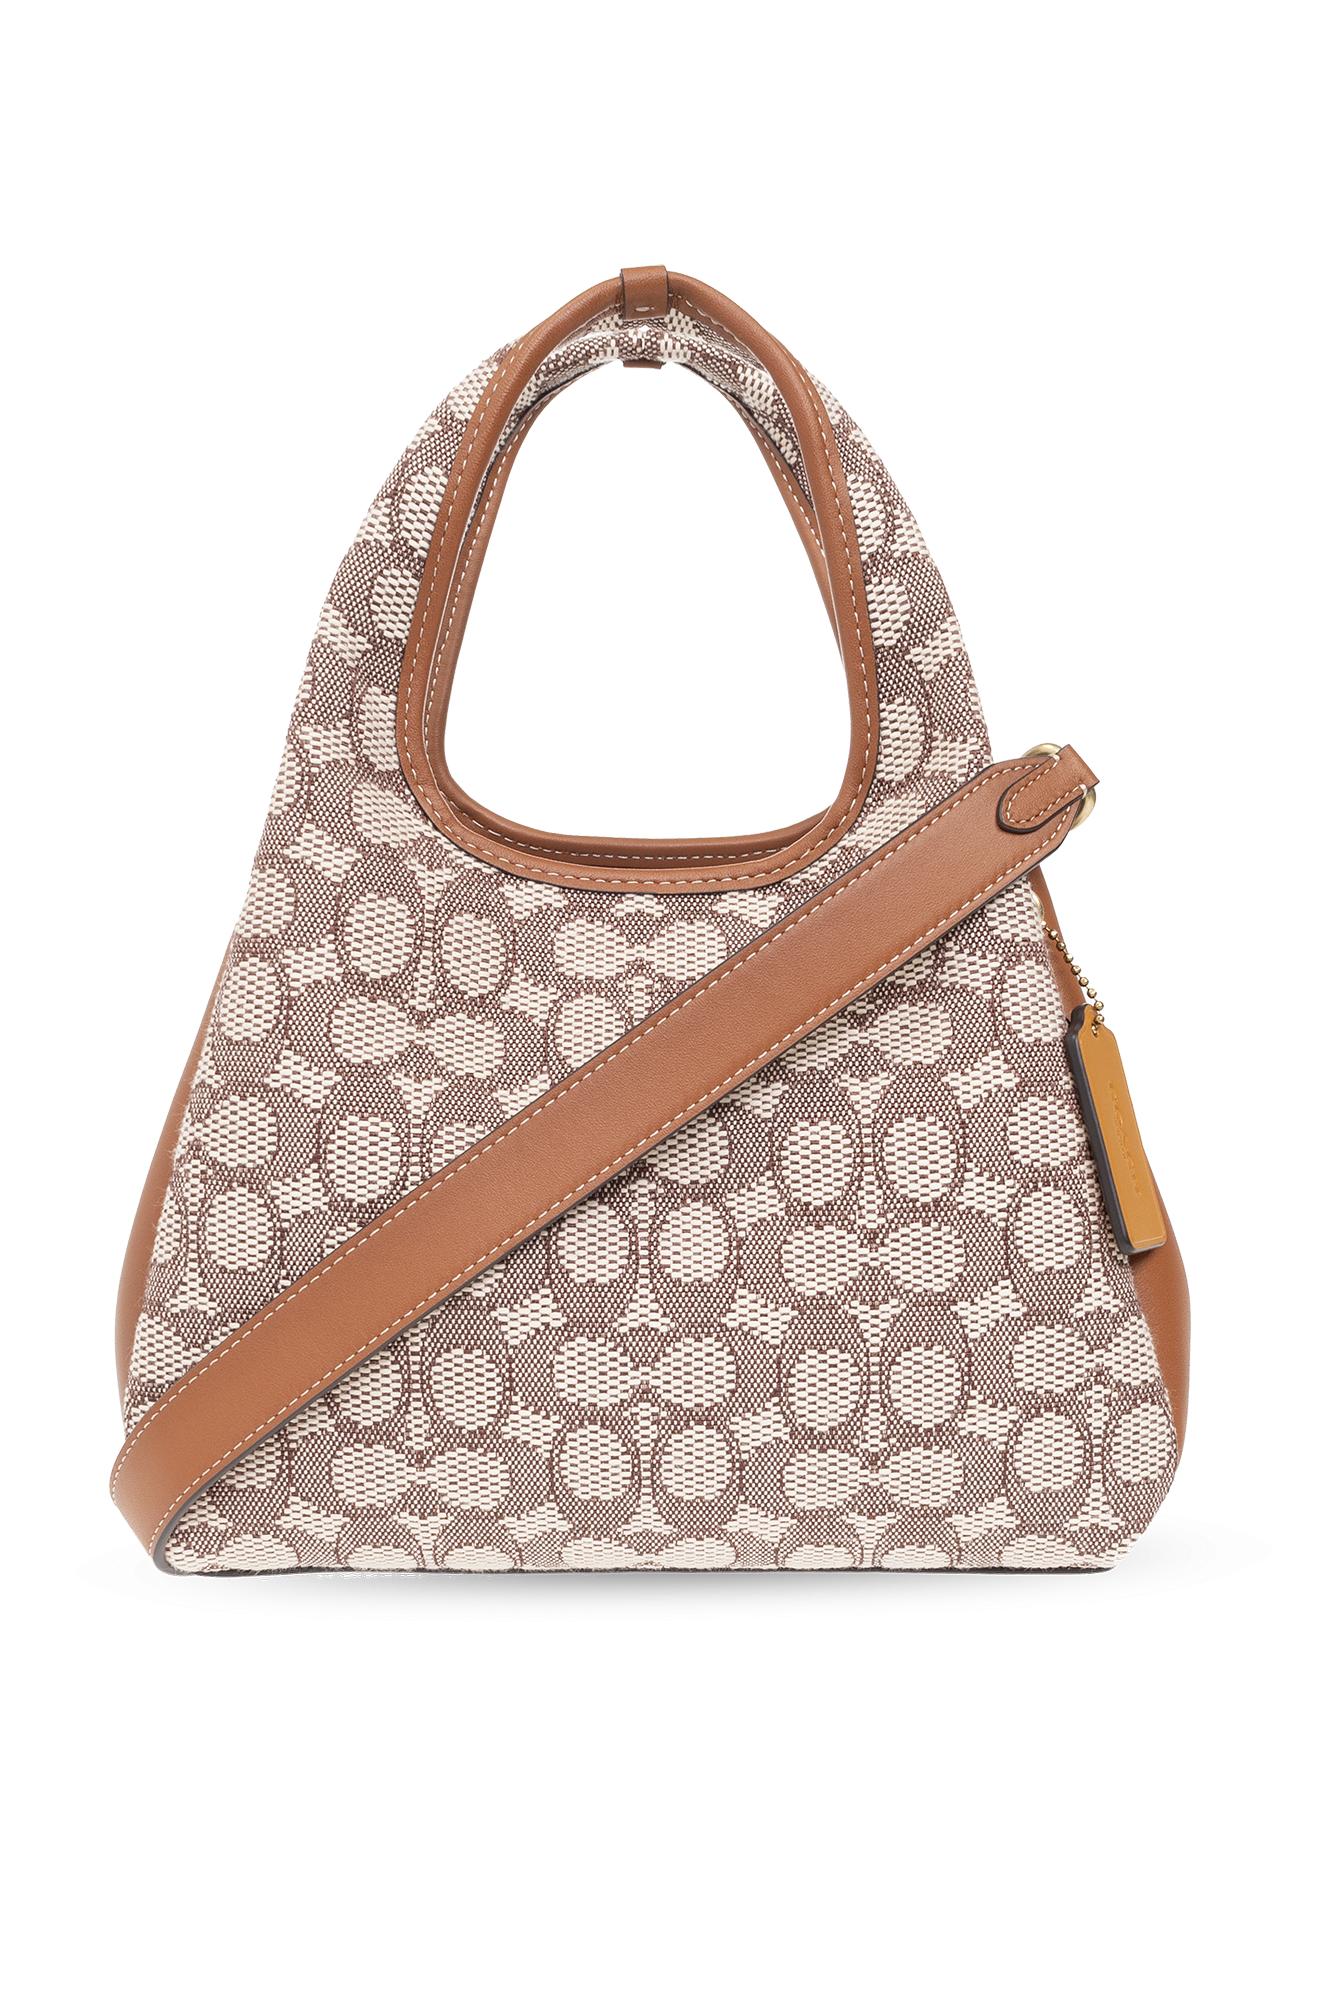 Coach Brown/Beige Signature Coated Canvas and Leather Hadley Hobo Coach